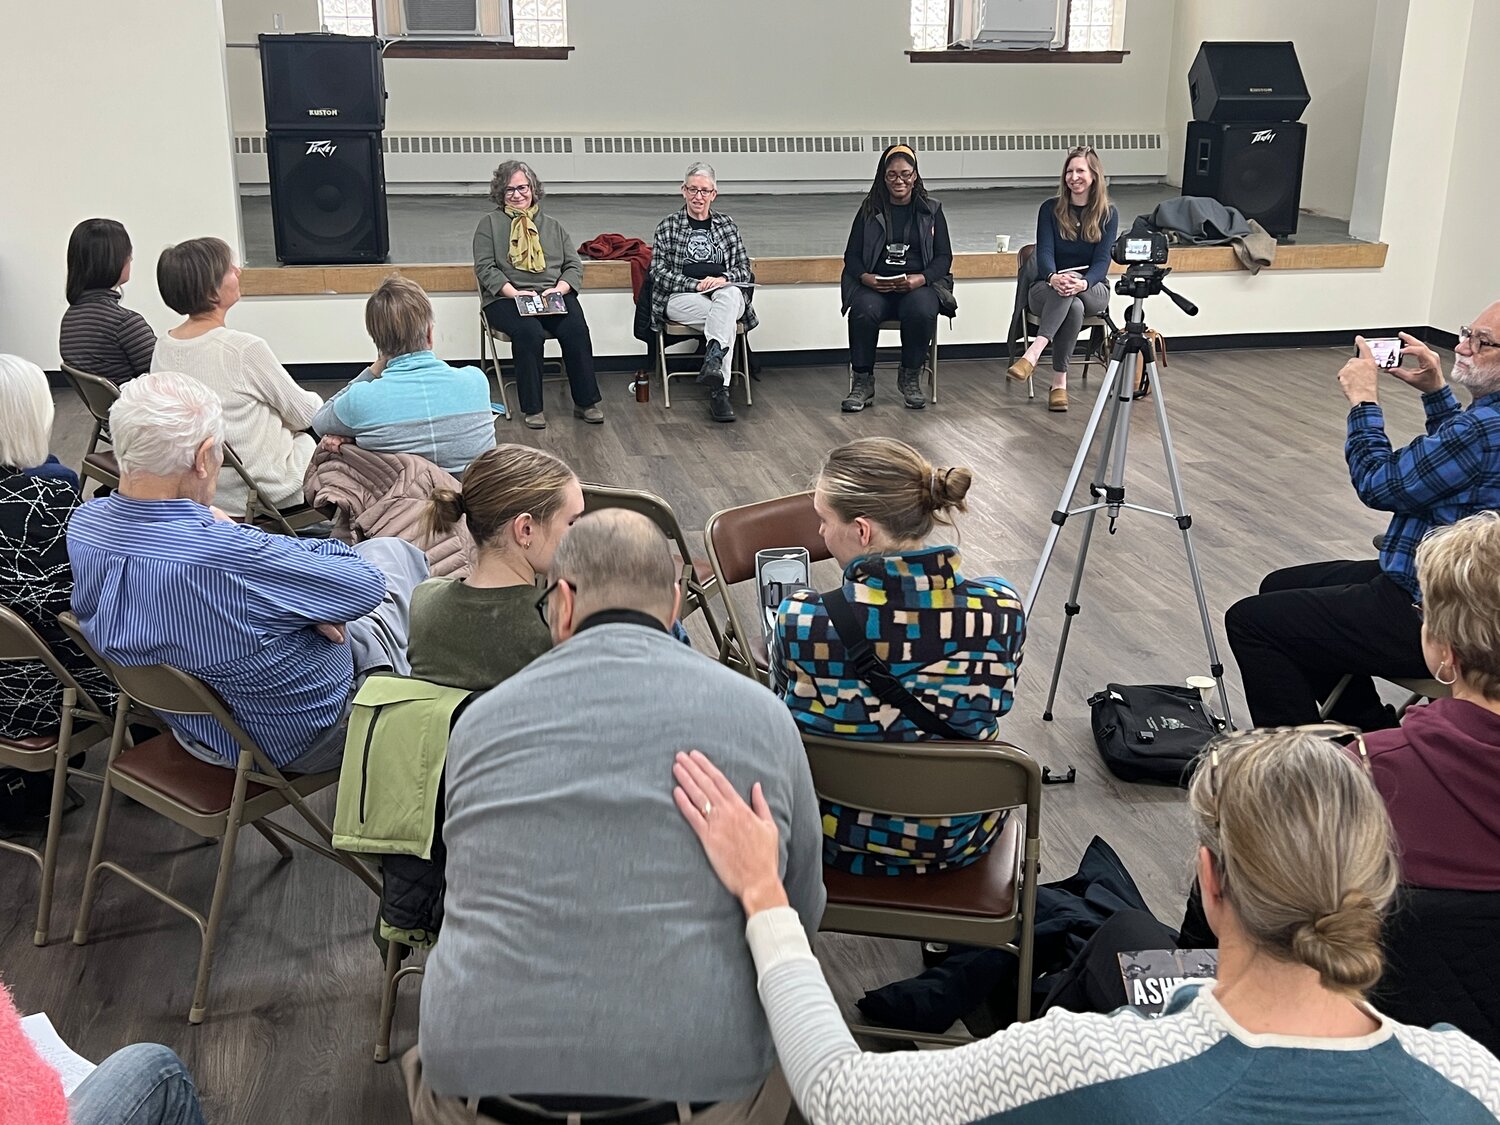 During a reading of her book “Ashes to Action: Finding Myself at the Intersection of the Minneapolis Uprising” at church in November, author Shari Seifert (second from left) and community members Susan Heineman, Marcia Howard and Katie Dillon talk about ways that Calvary Lutheran Church showed up for their neighbors at George Floyd Square during and following the uprising.